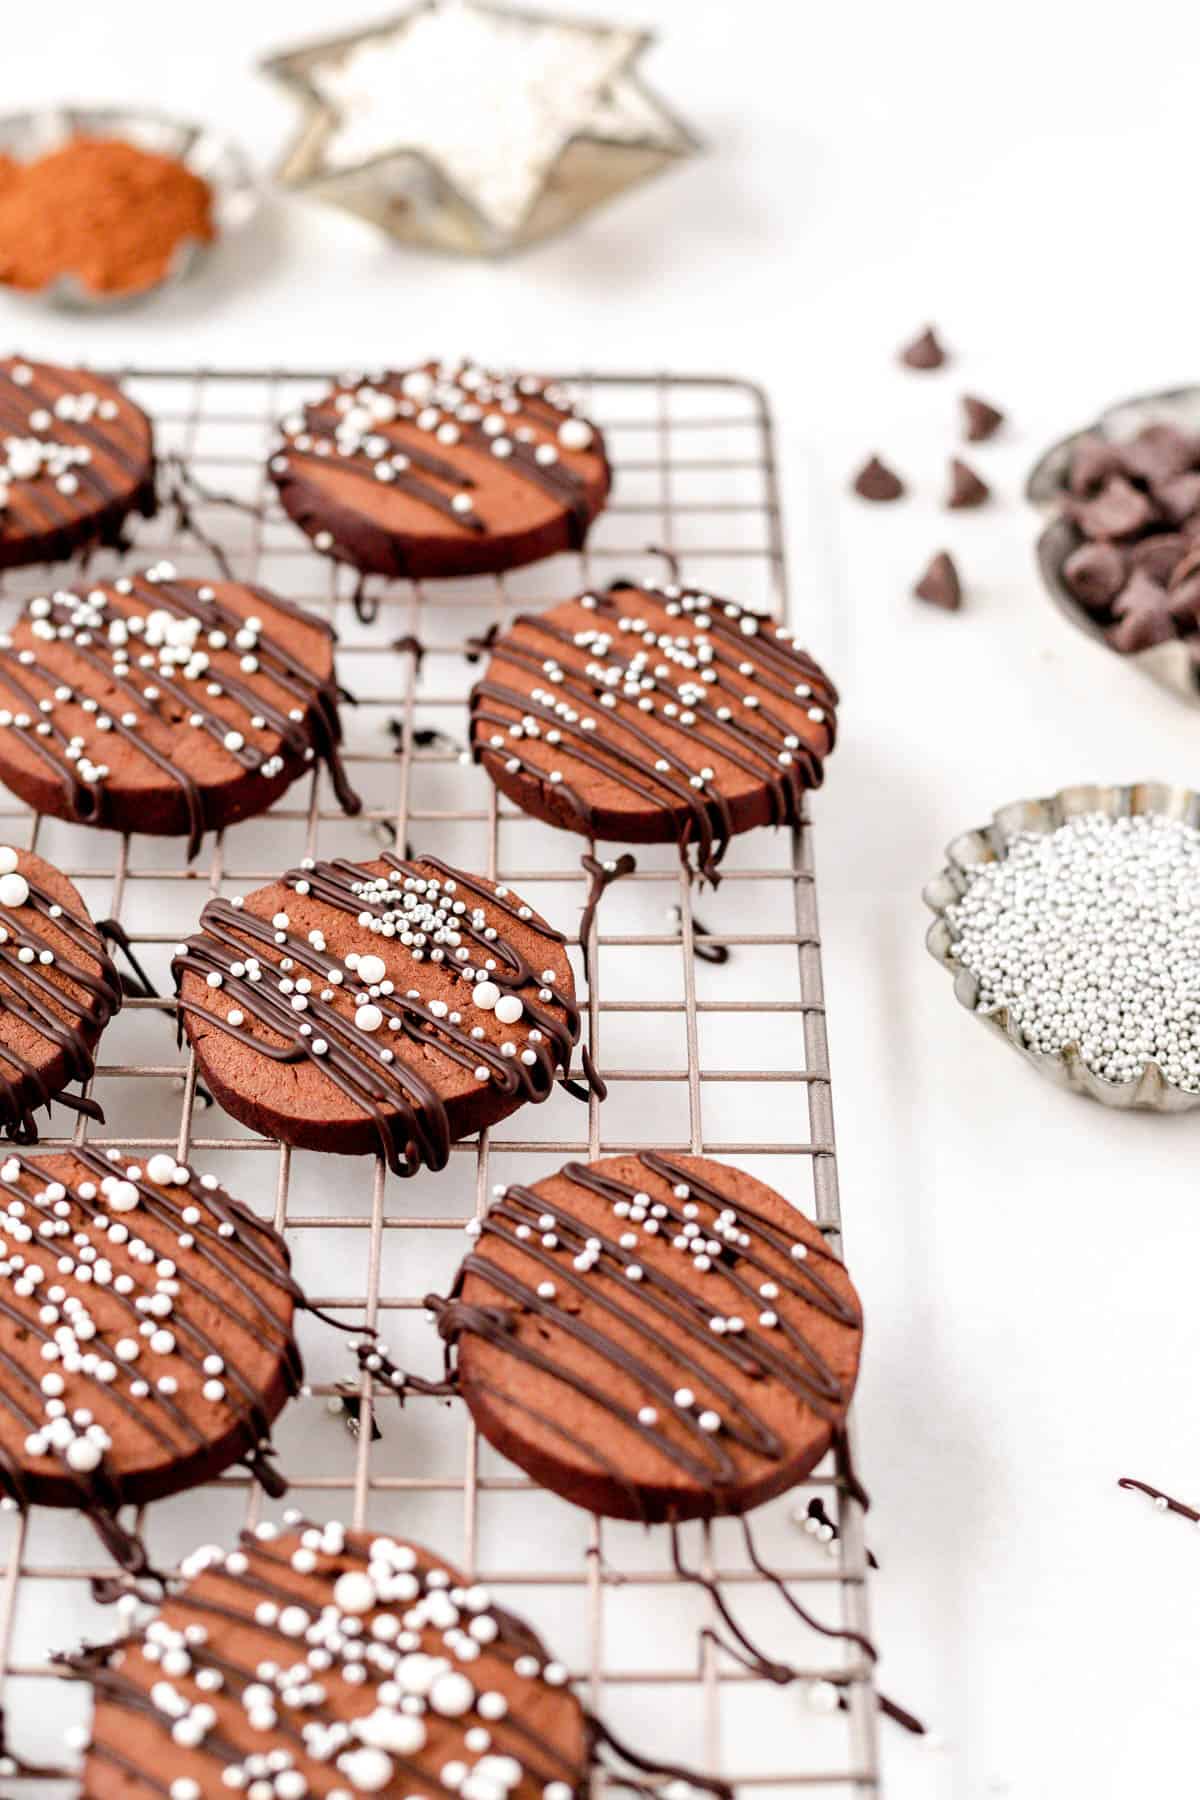 Decorated chocolate butter cookies on a colling rack with tins of sprinkles, chocolate chips, and cocoa